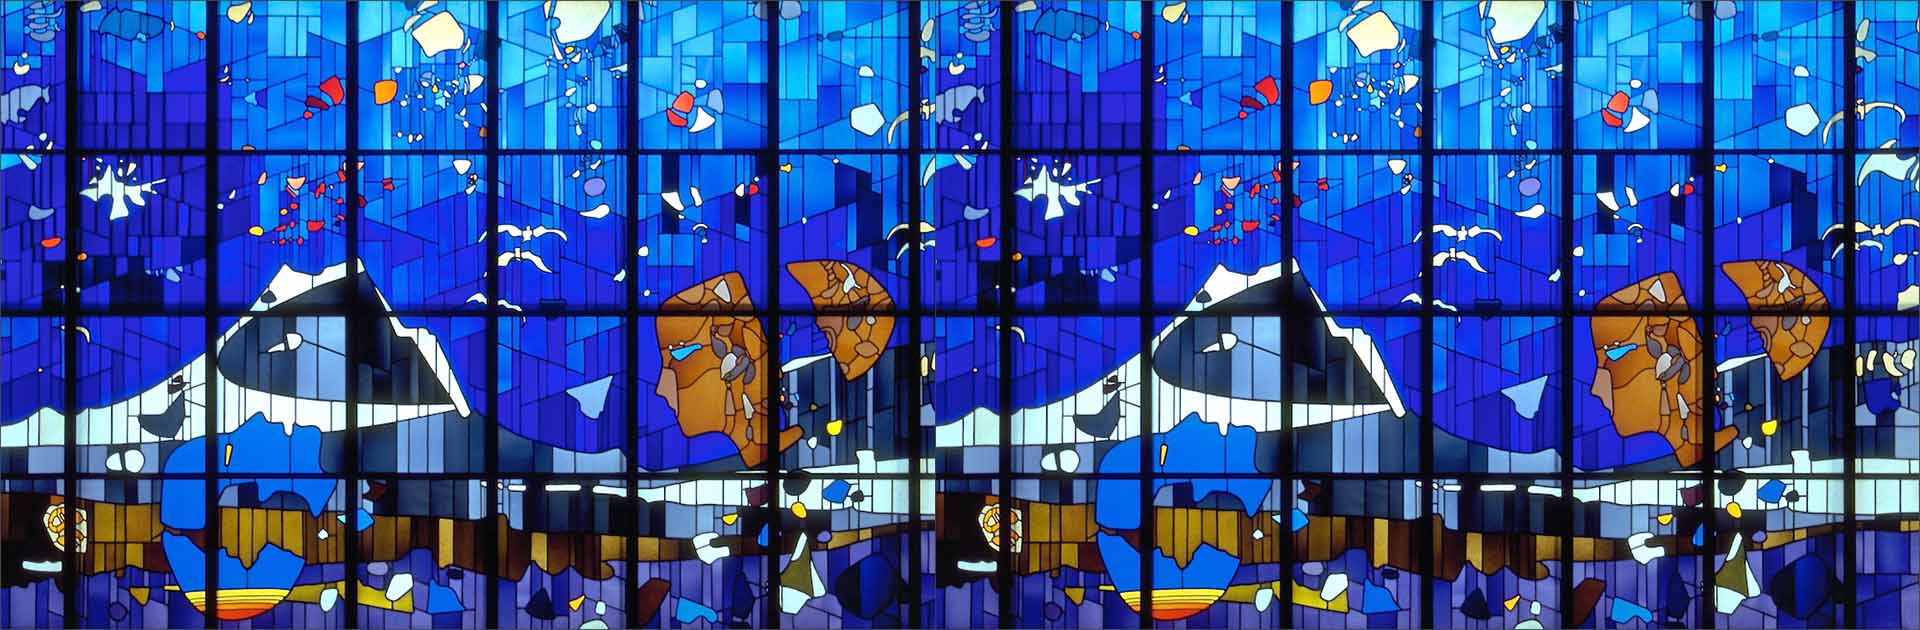 Latin America. Photo composition of the stained-glass window “El nacimiento del hombre” by Héctor Poleo, taken in 1995 at the metro station La Paz in Caracas, Venezuela